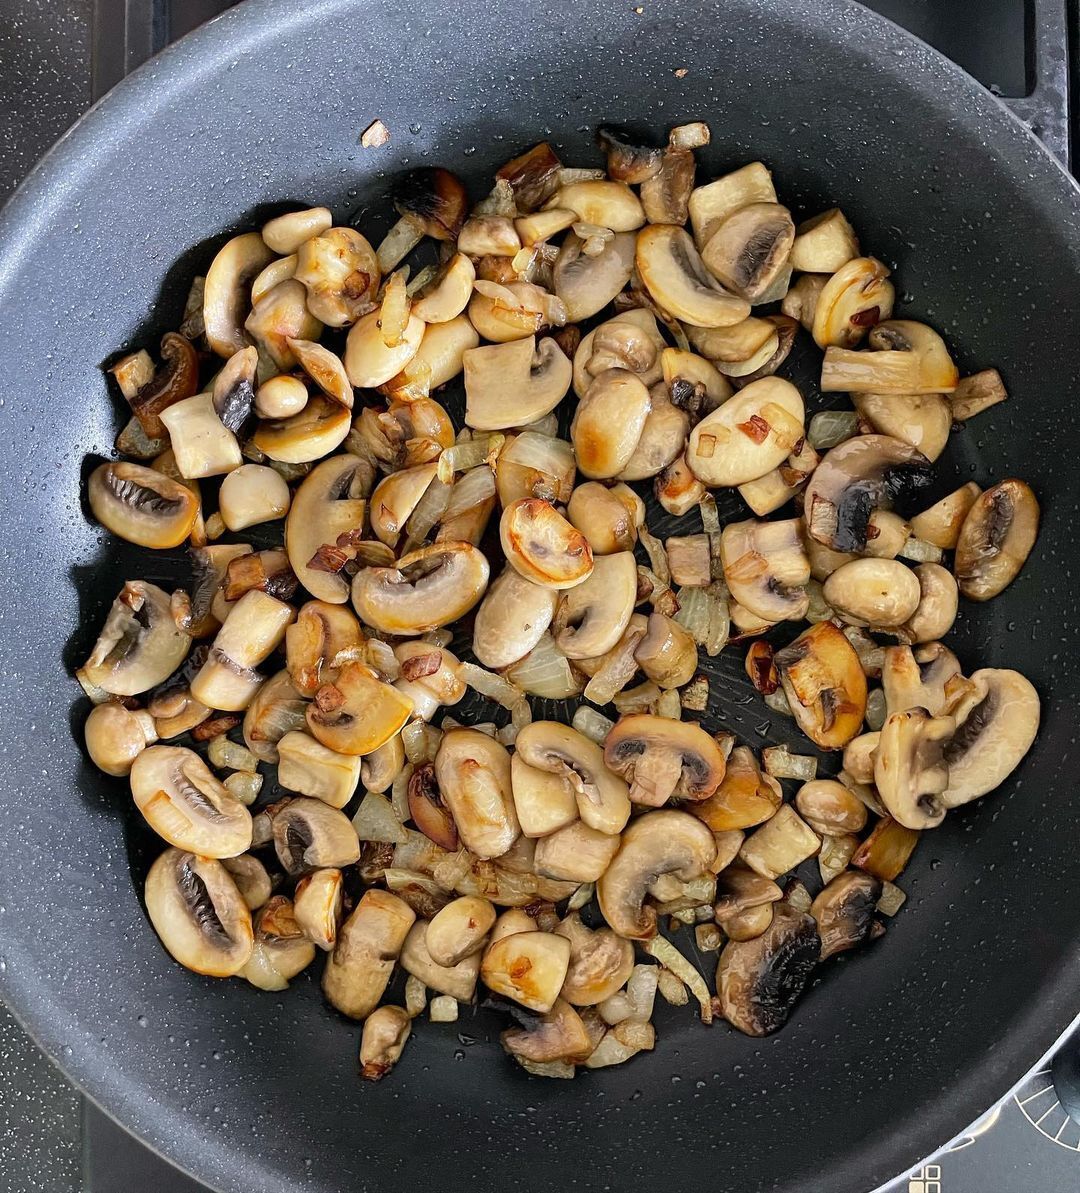 Fried onions and mushrooms